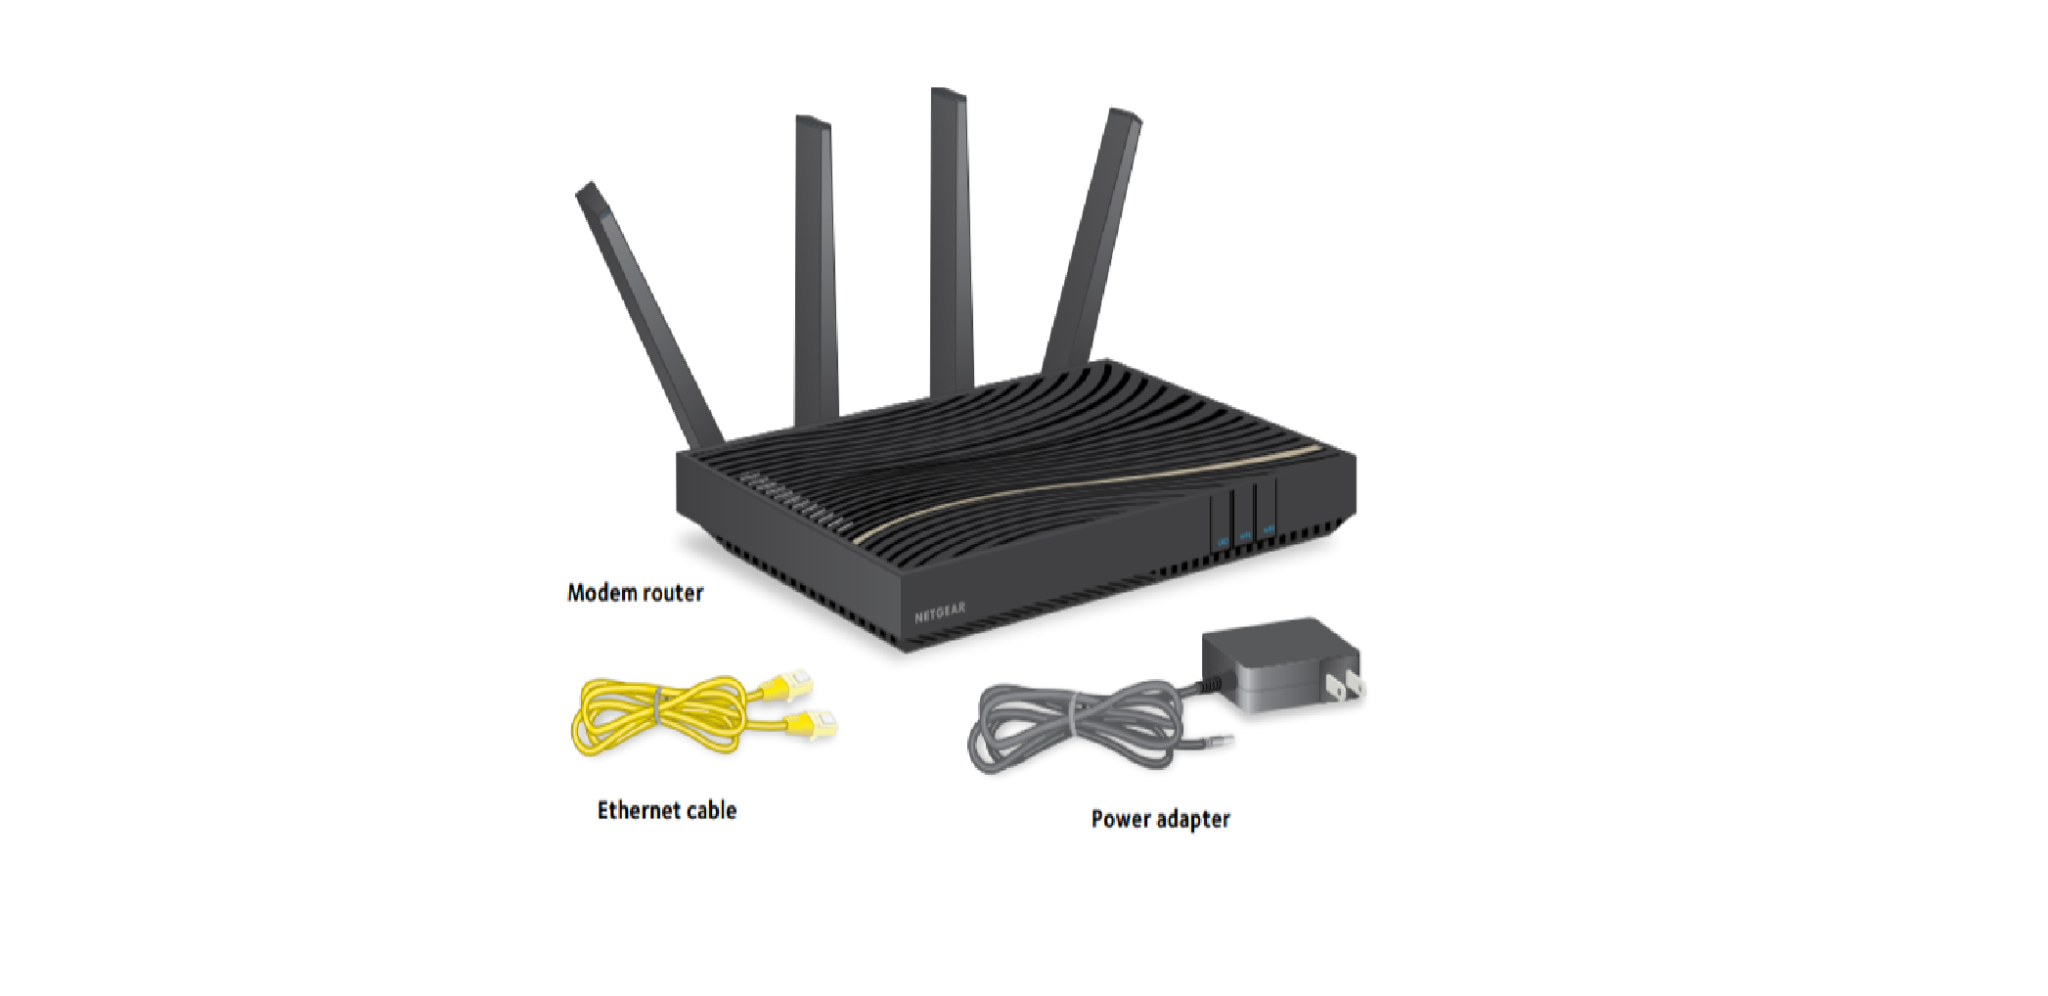 Nighthawk X4 AC3200 WiFi Cable Modem Router C7500